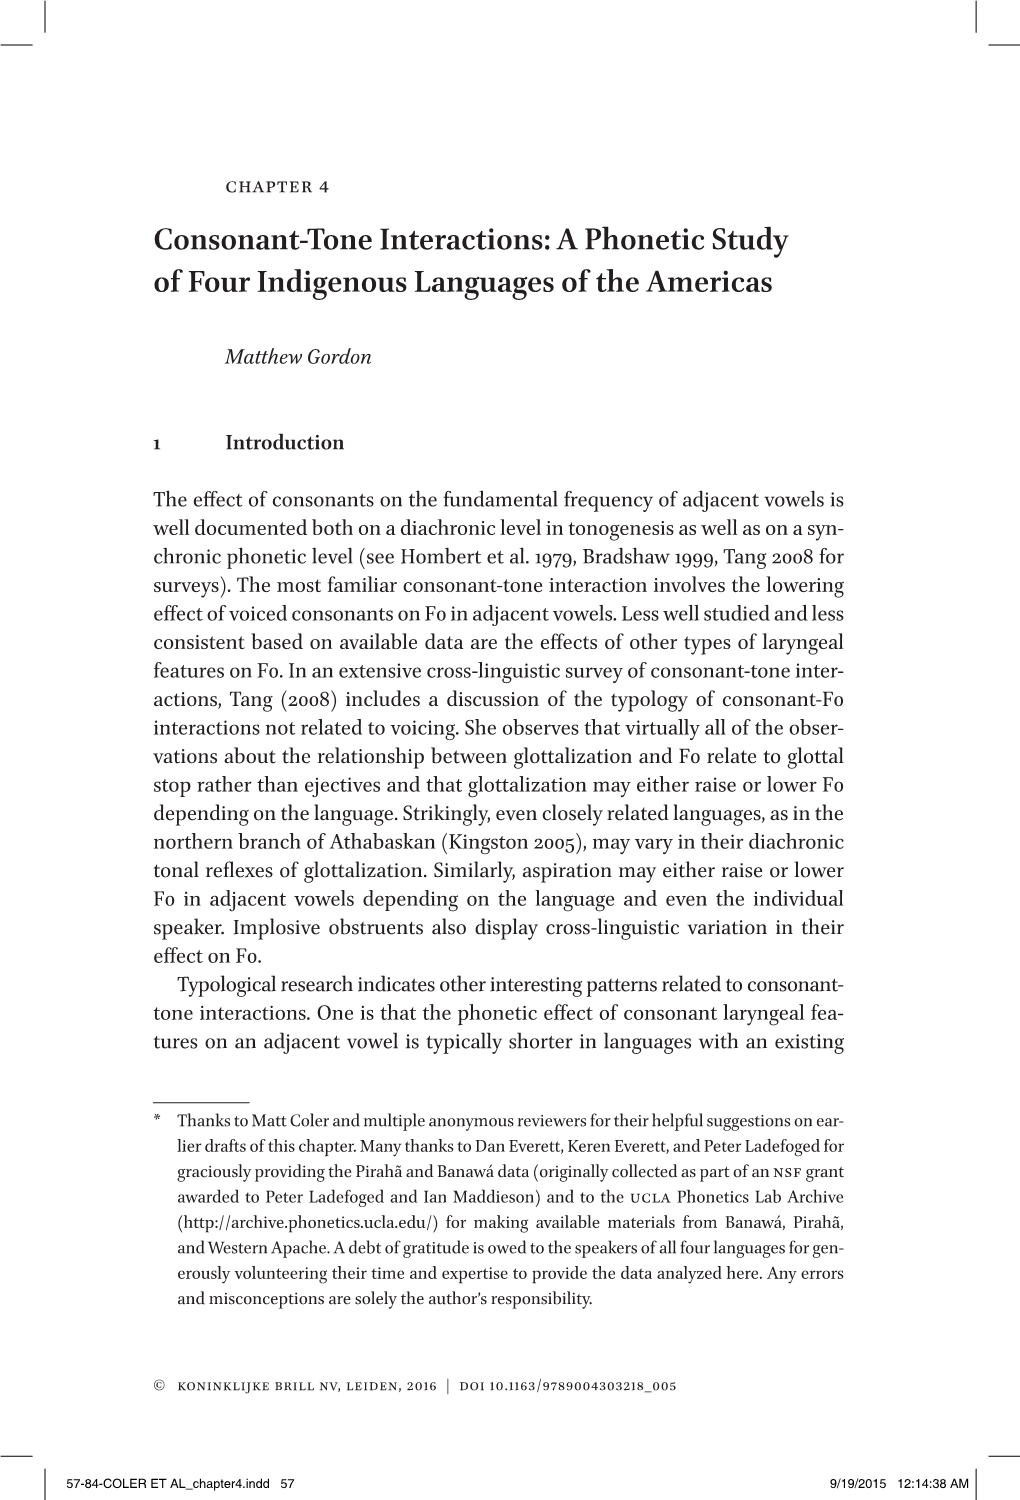 Consonant-Tone Interactions: a Phonetic Study of Four Indigenous Languages of the Americas